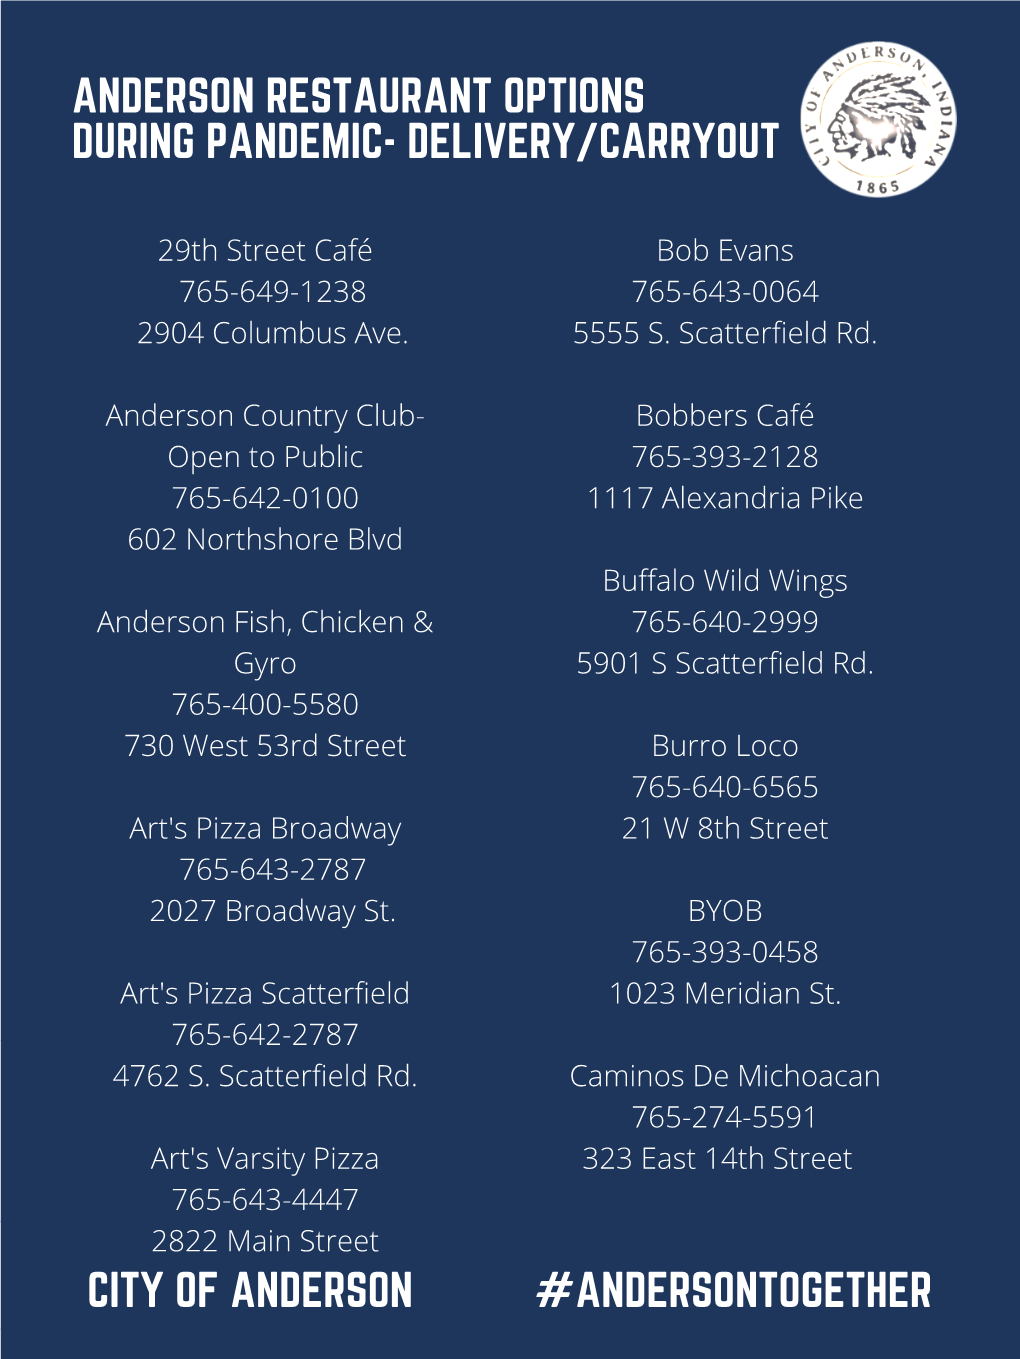 Anderson Restaurant Options During Pandemic- Delivery/Carryout City Of